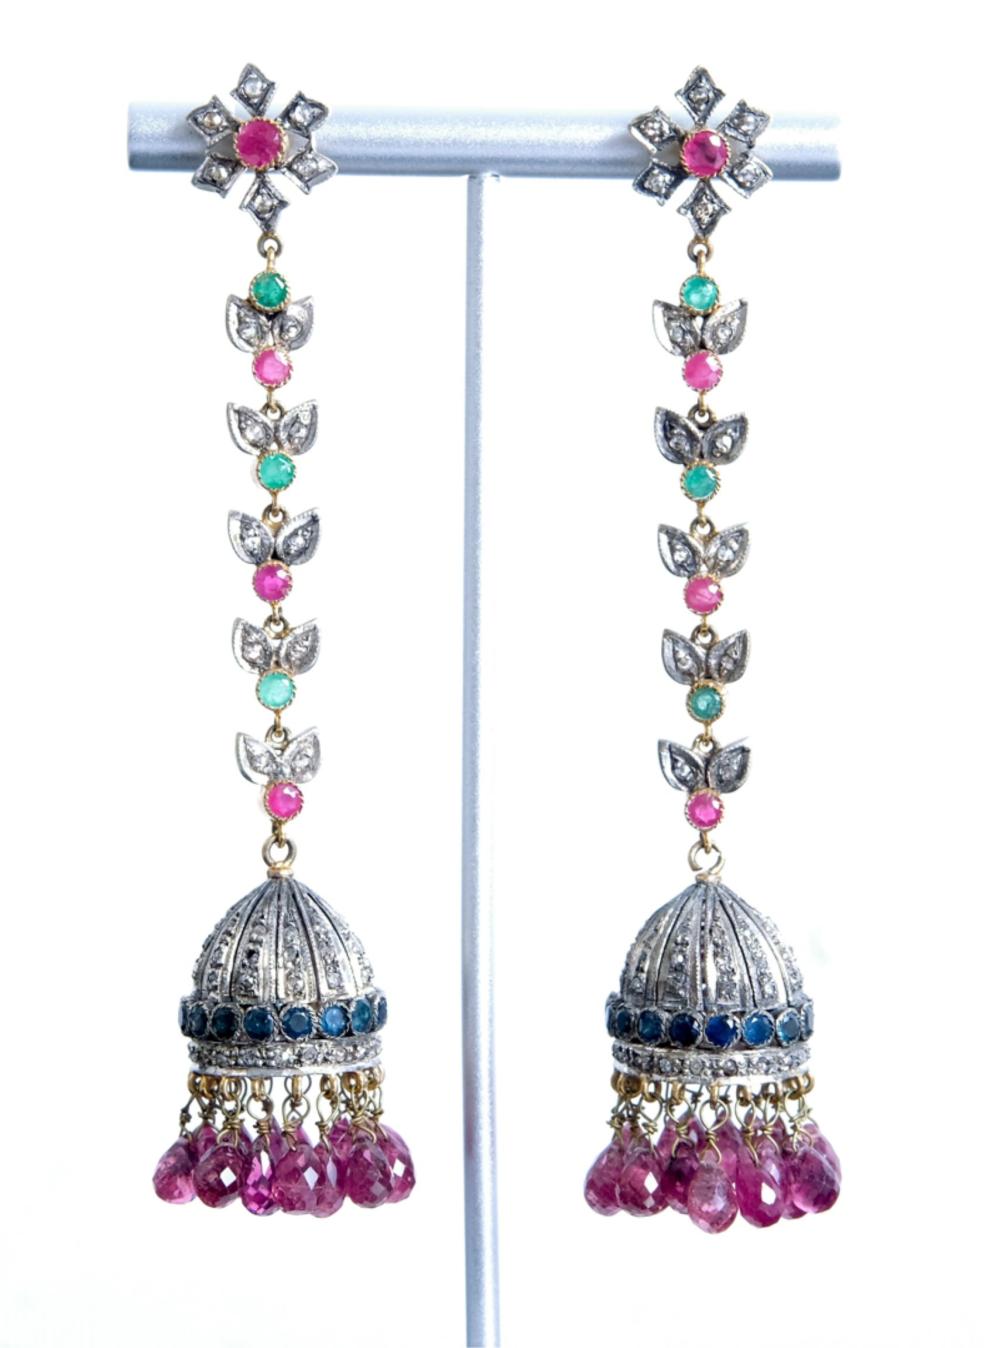 PAIR, MUGHAL STYLE GOLD SILVER